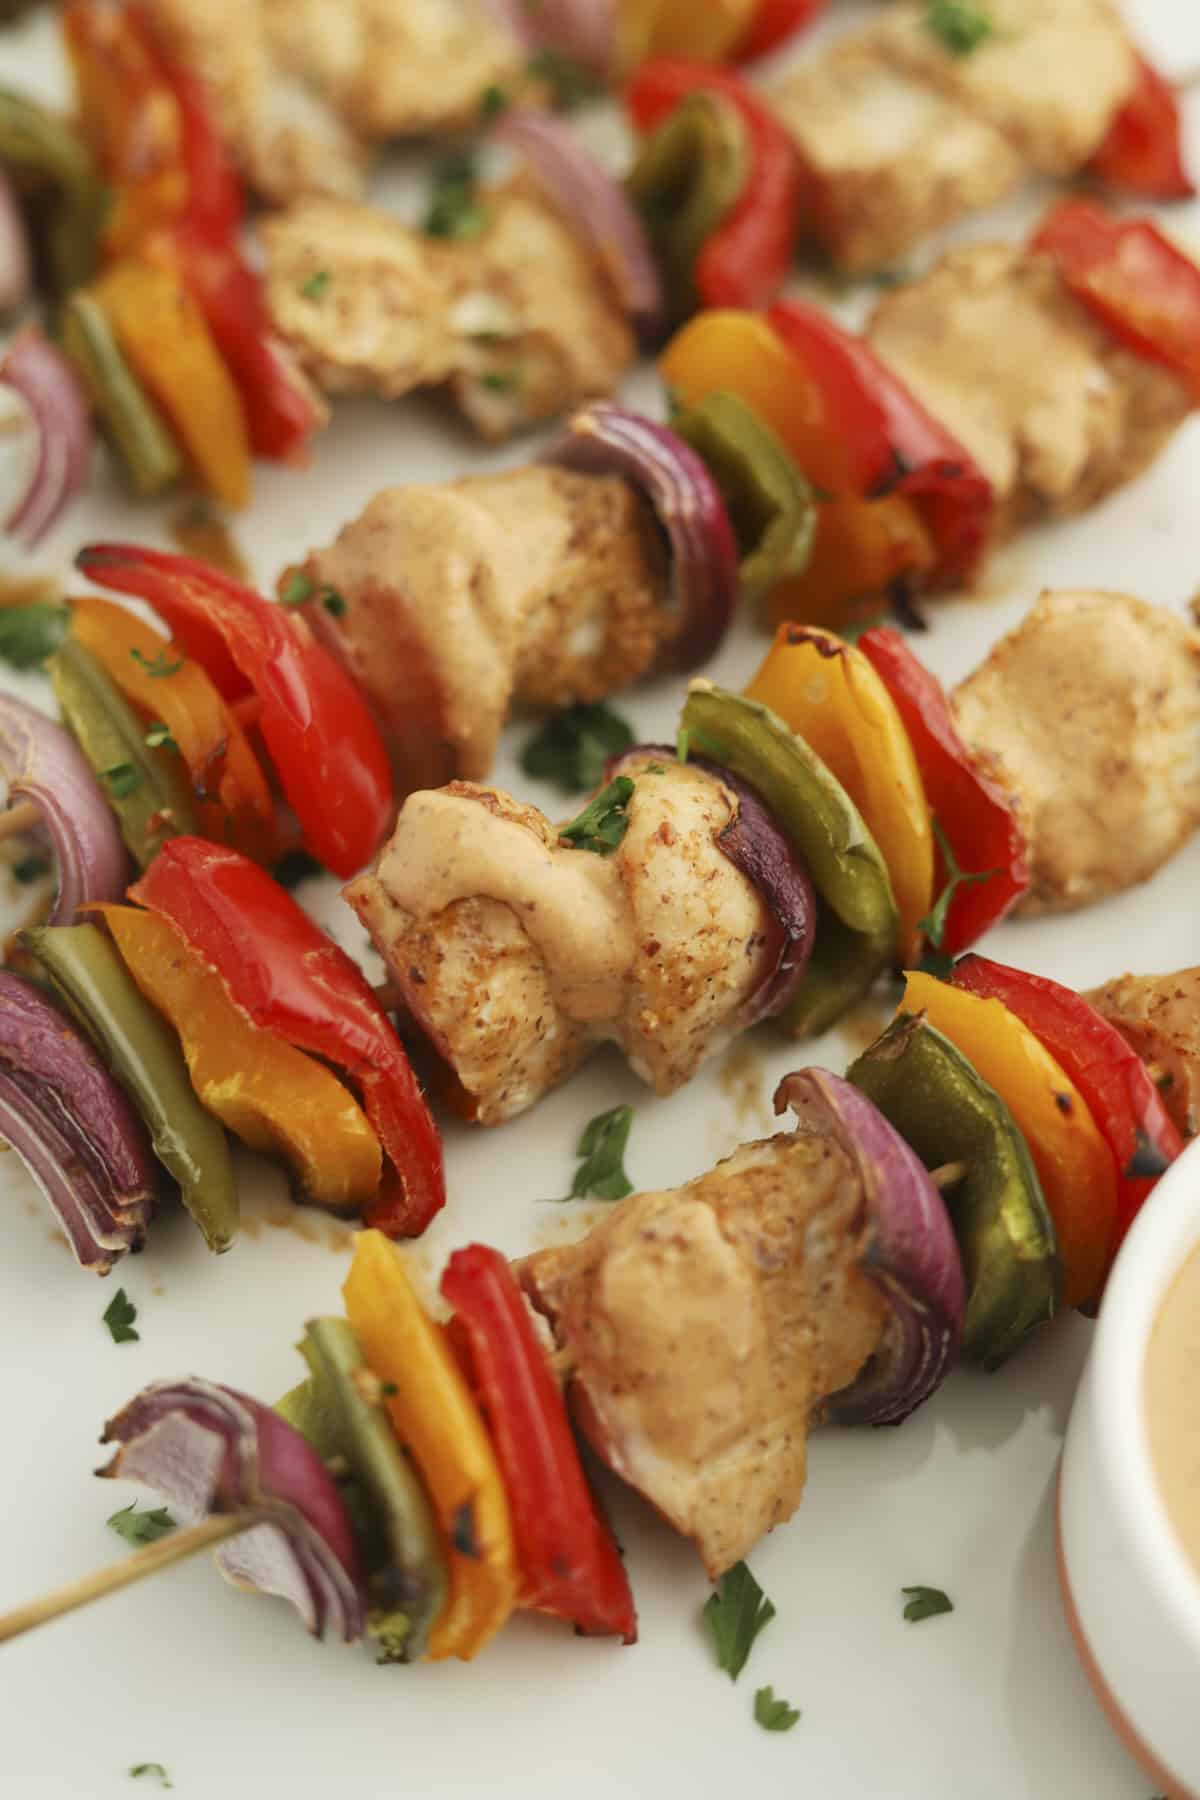 oven-baked chipotle chicken skewers with red, yellow, and green peppers and red onion